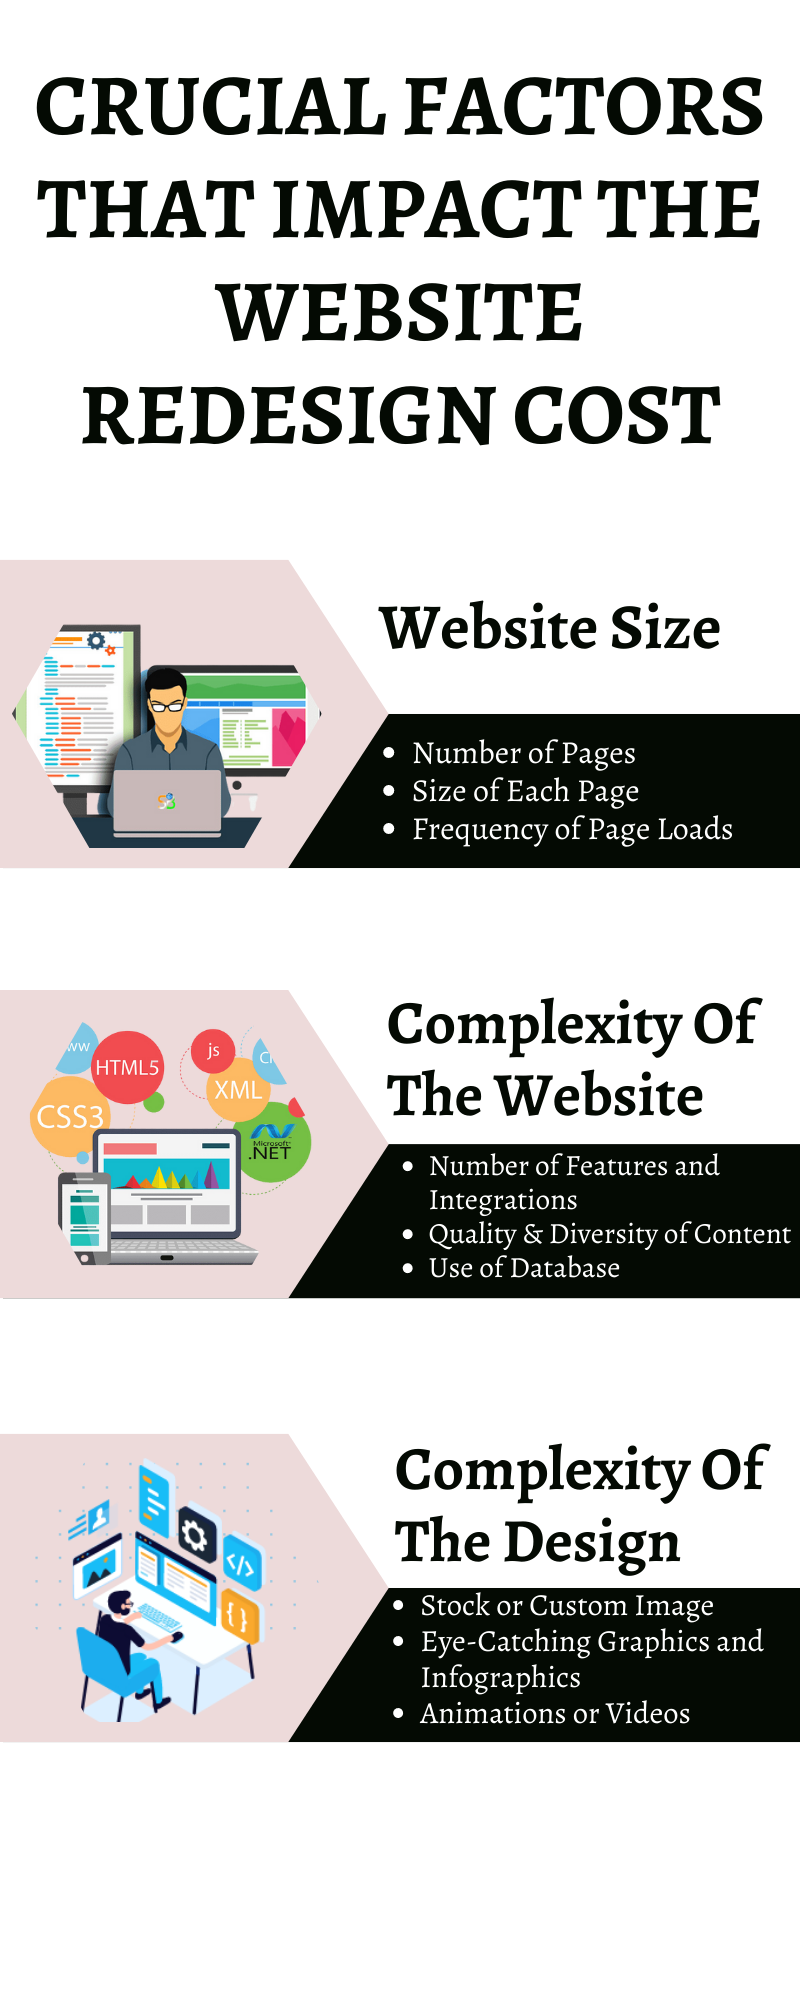 Crucial Factors that Impact the Website Redesign Cost